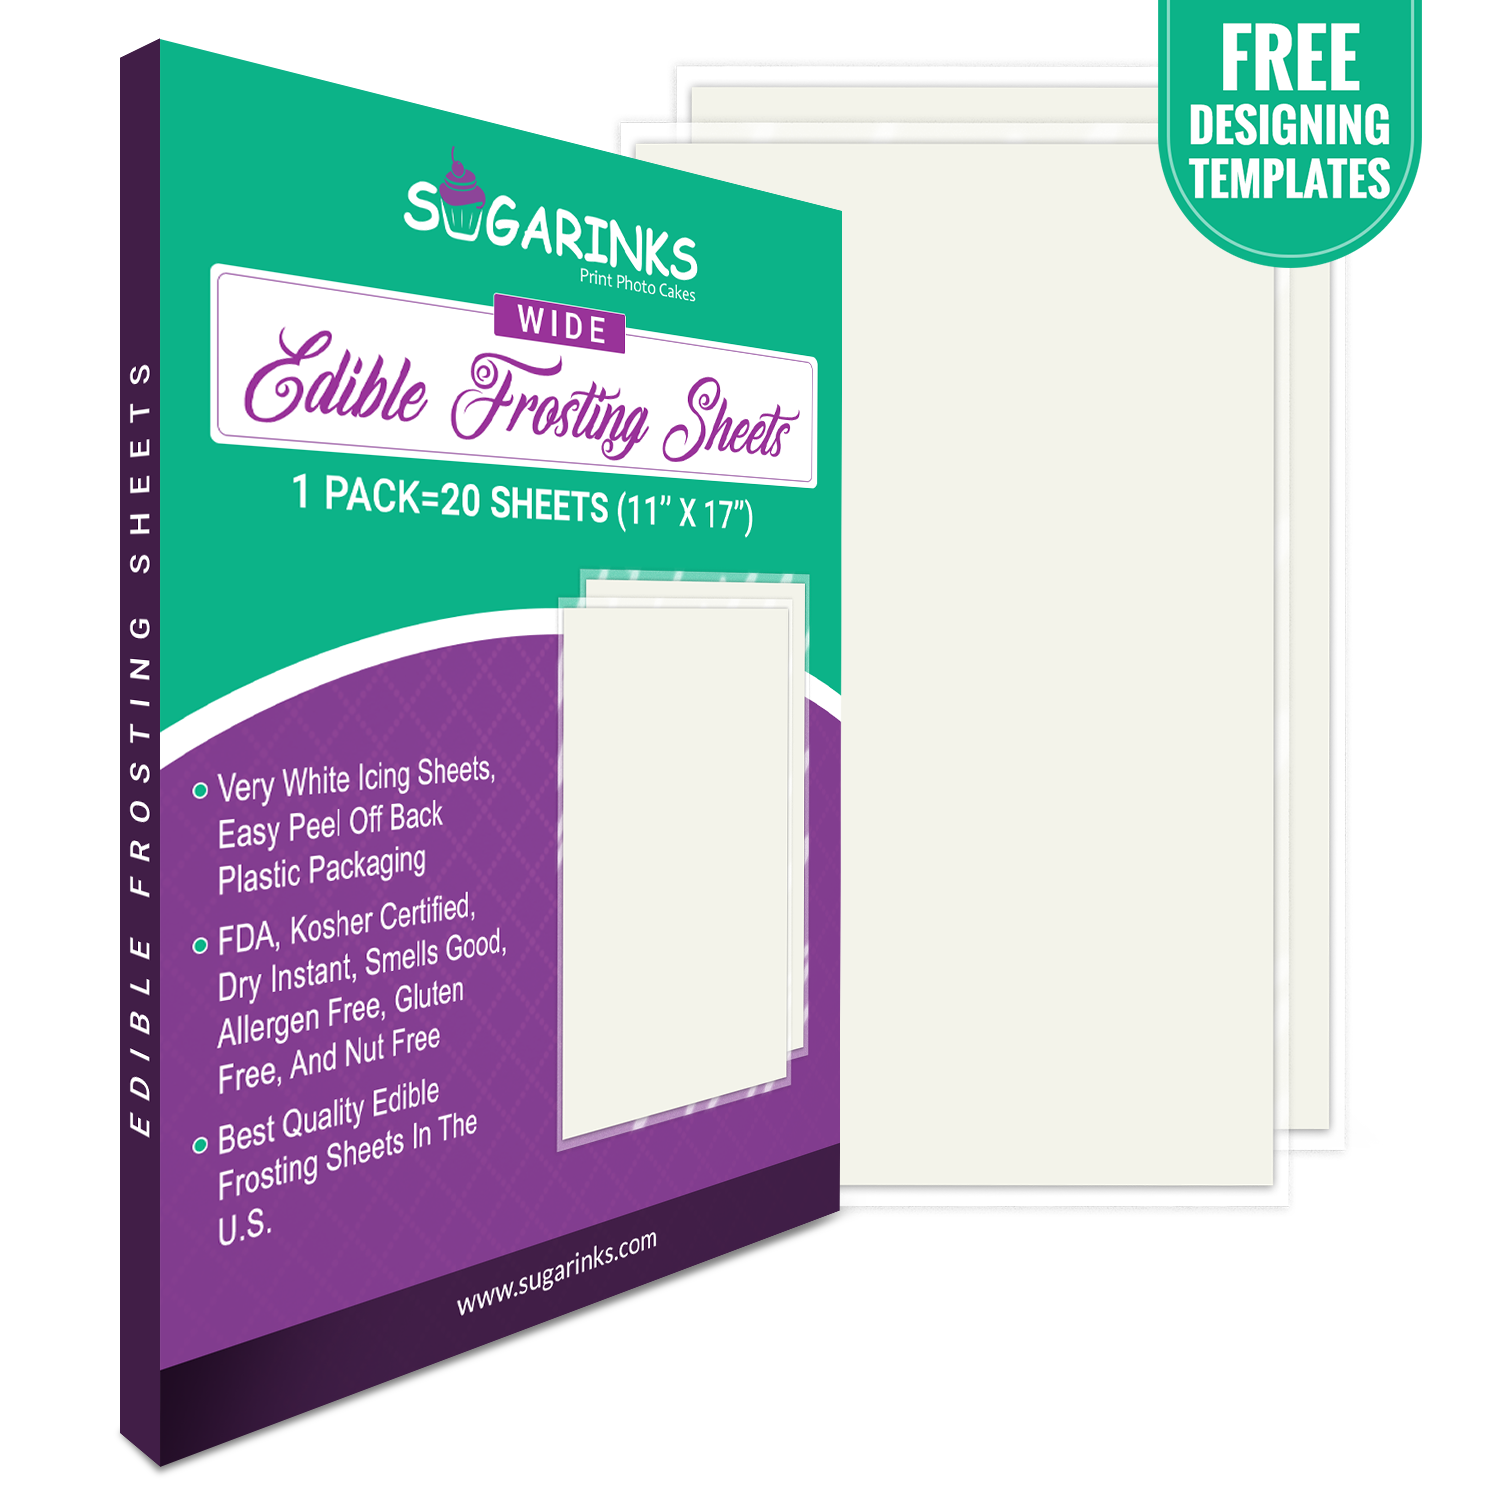 Sugarinks Premium Quality Wide Format Blank Frosting Sheets (11”X17”) Pack of 20 Sheets